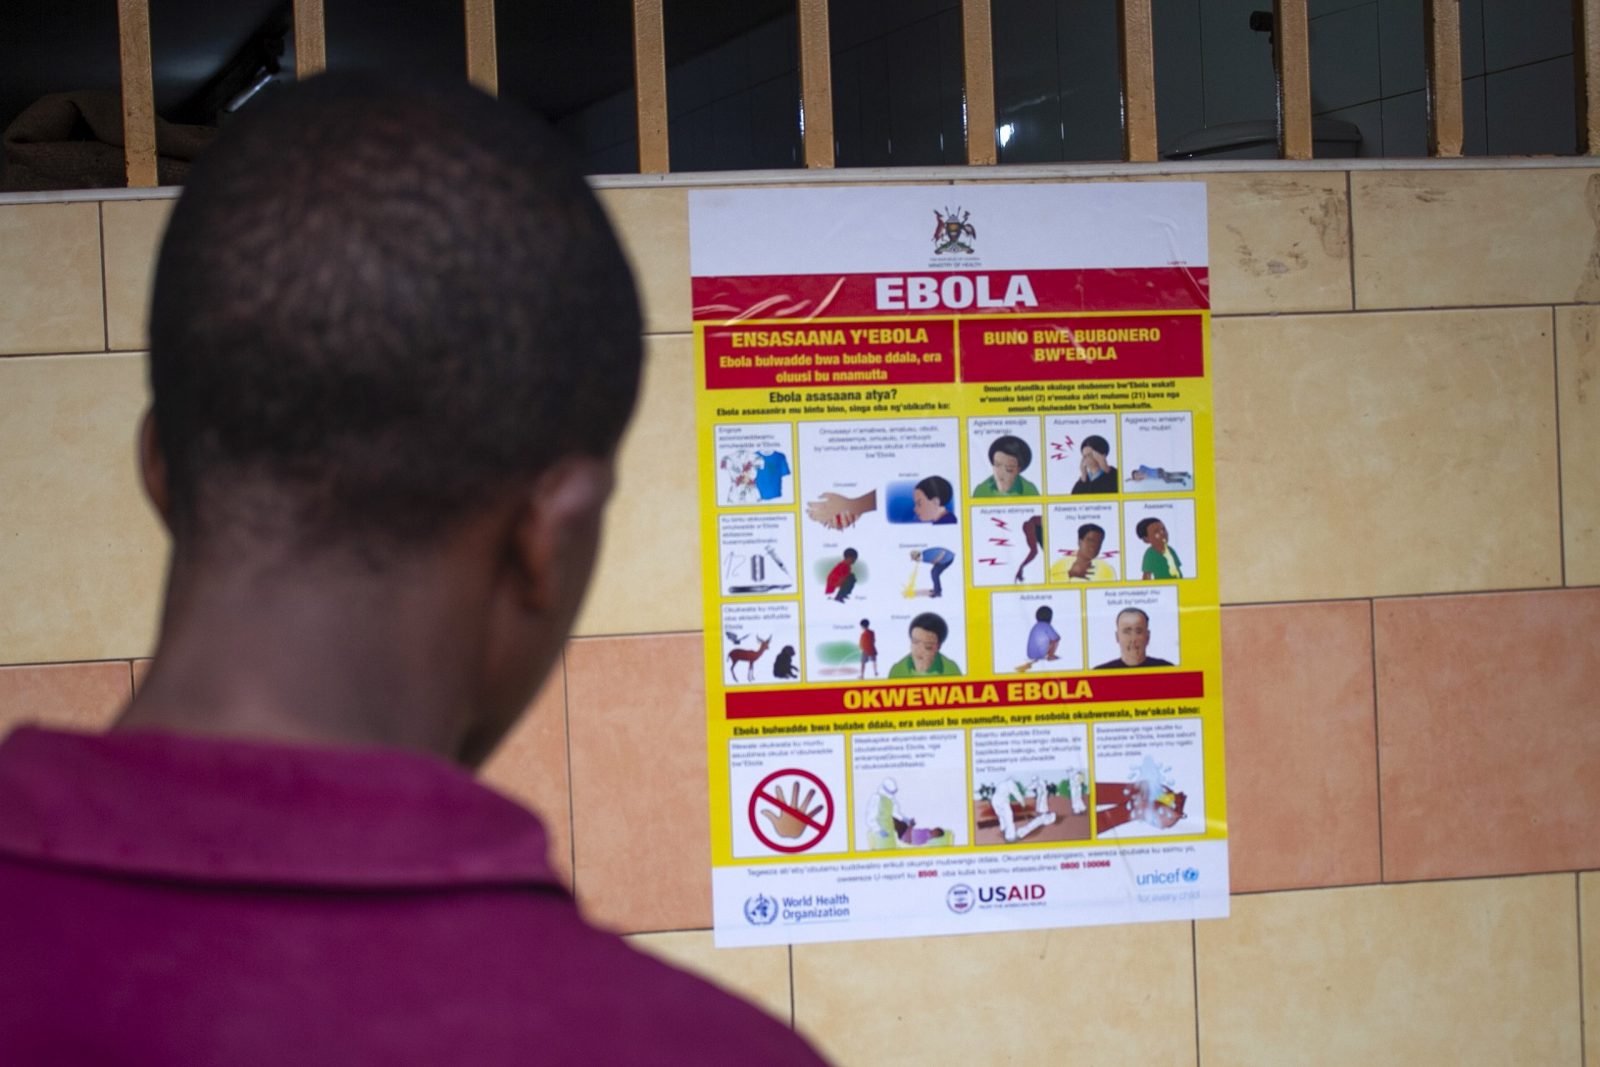 epa10212386 A man looks at an Ebola virus disease awareness campaign poster following an outbreak of Ebola in Uganda, in Kampala, Uganda, 28 September 2022. According to Uganda's Health Ministry, Ebola infections have risen across some districts in Uganda with the number of confirmed and suspected deaths at 36. The president addressed the nation on measures the government is putting in place to mitigate the spread.  EPA/Stringer